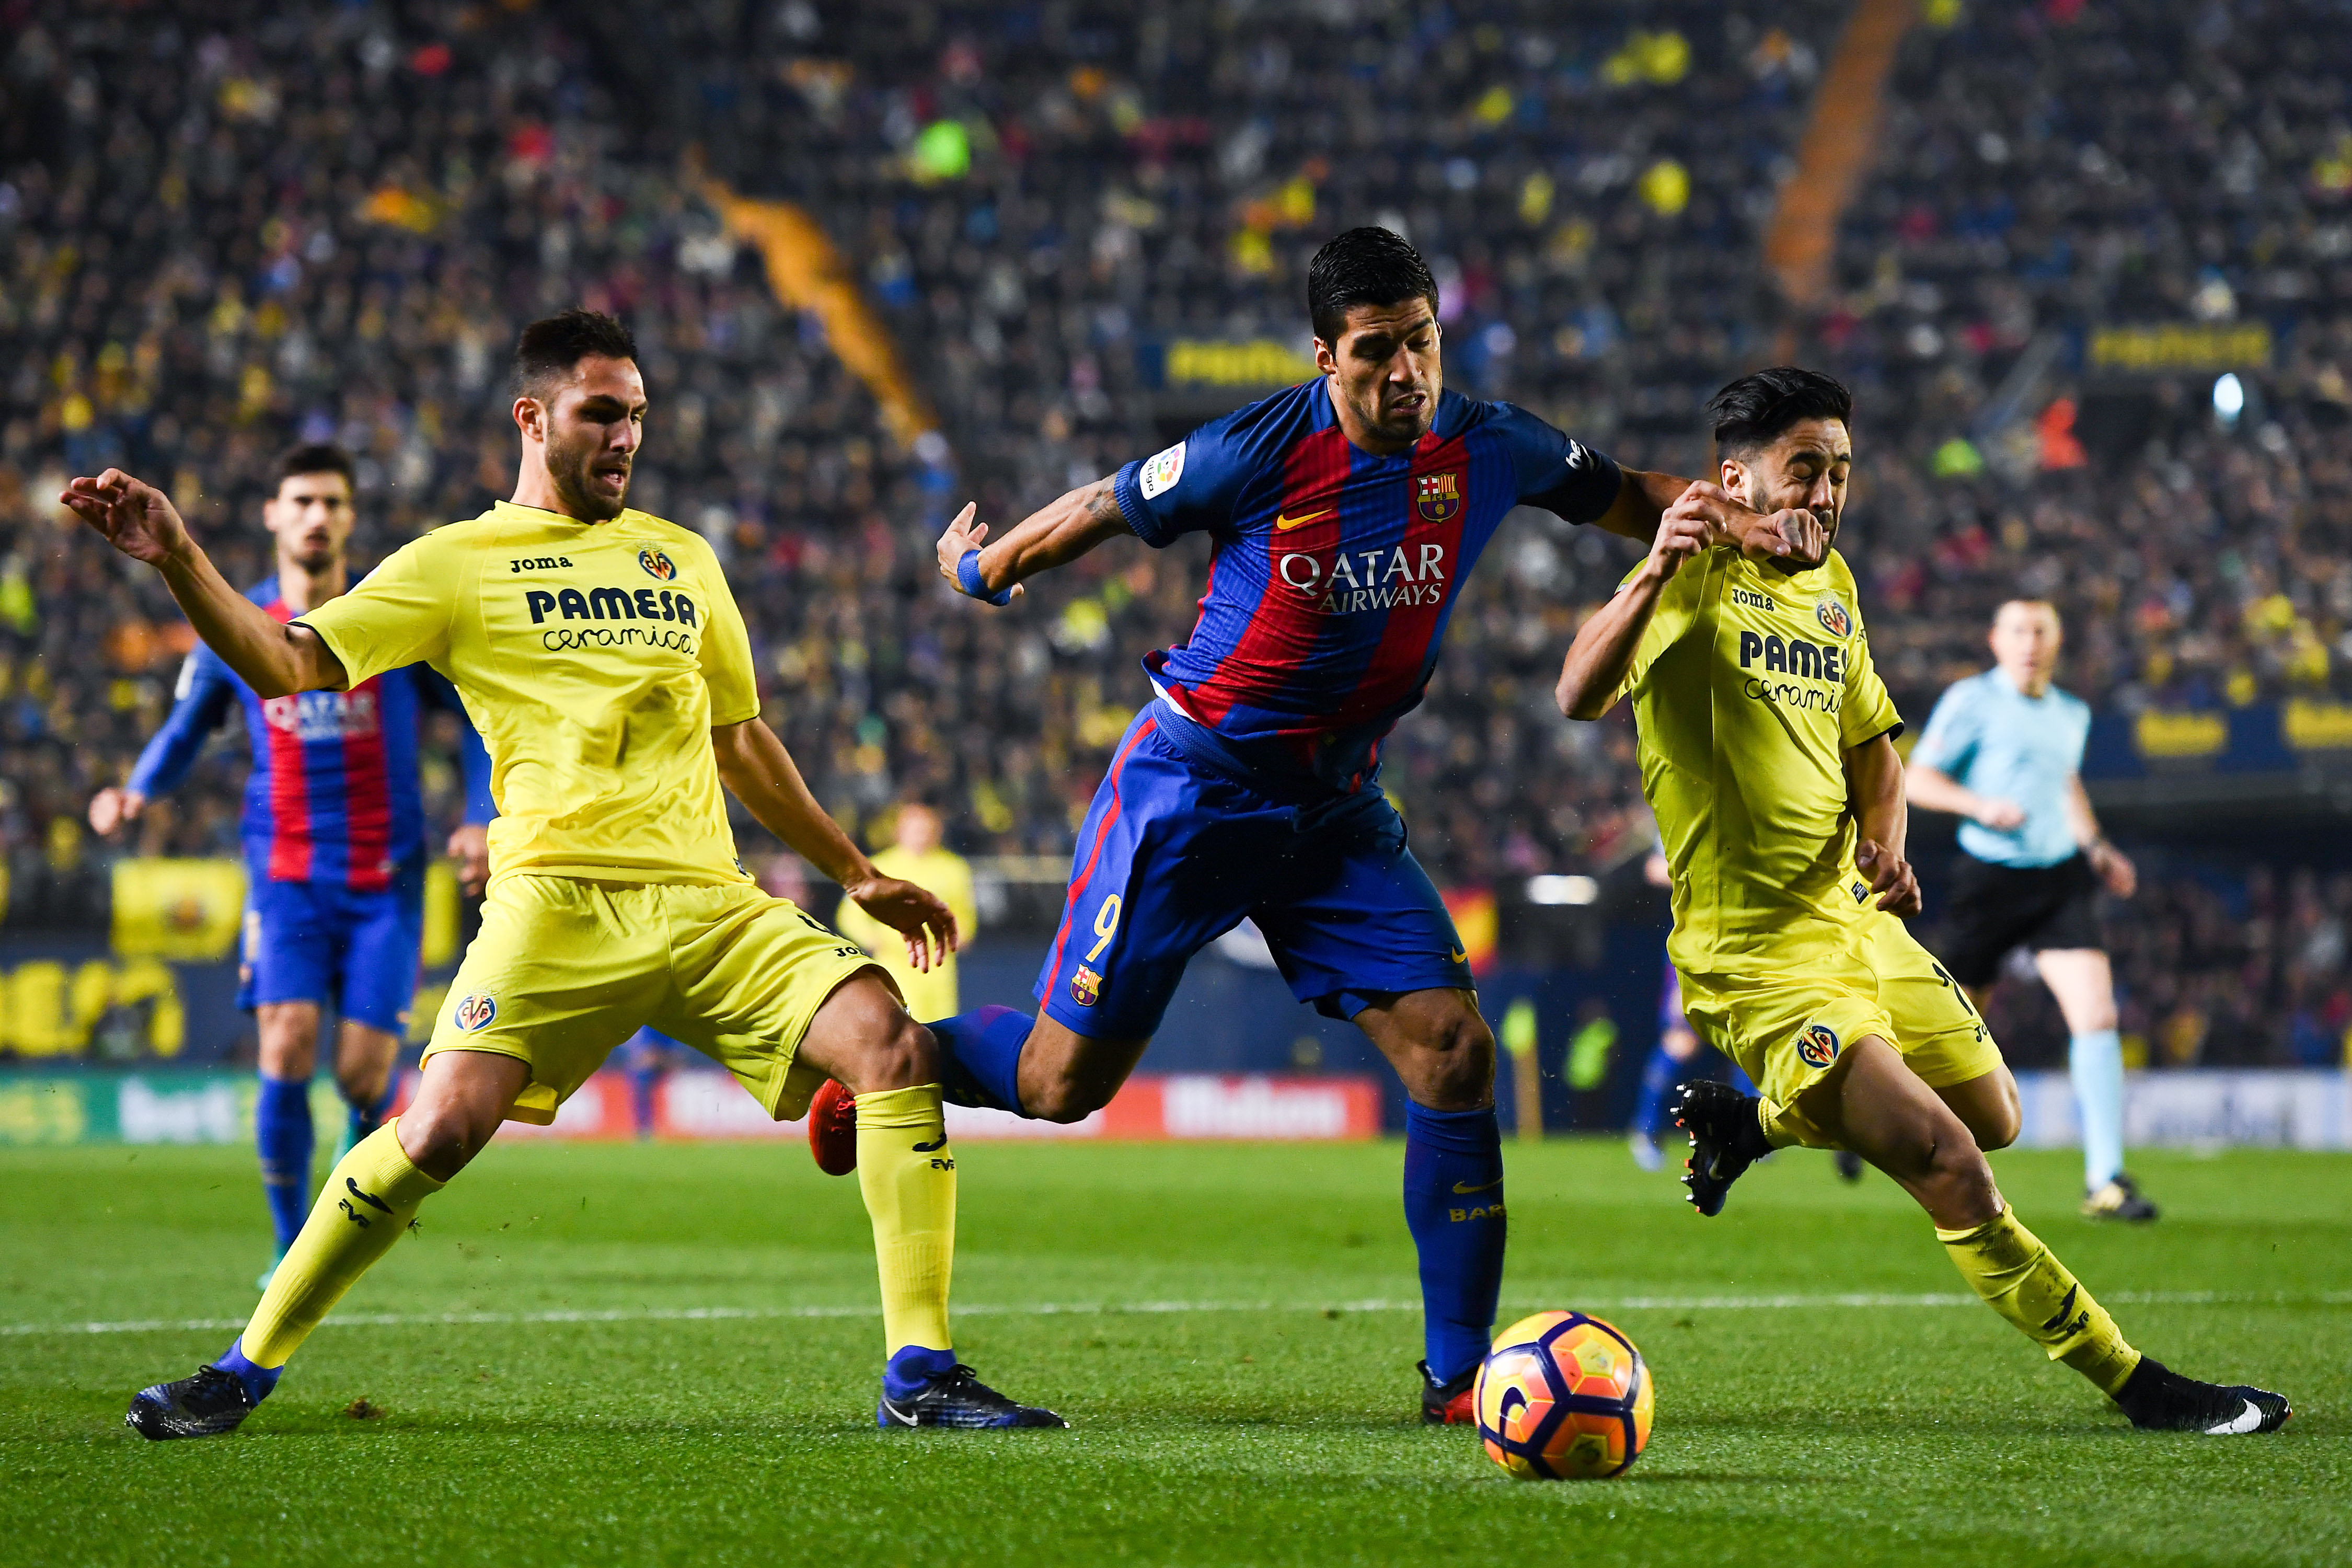 Luis Suarez knows how to break the Villarreal backline. (Photo by David Ramos/Getty Images)